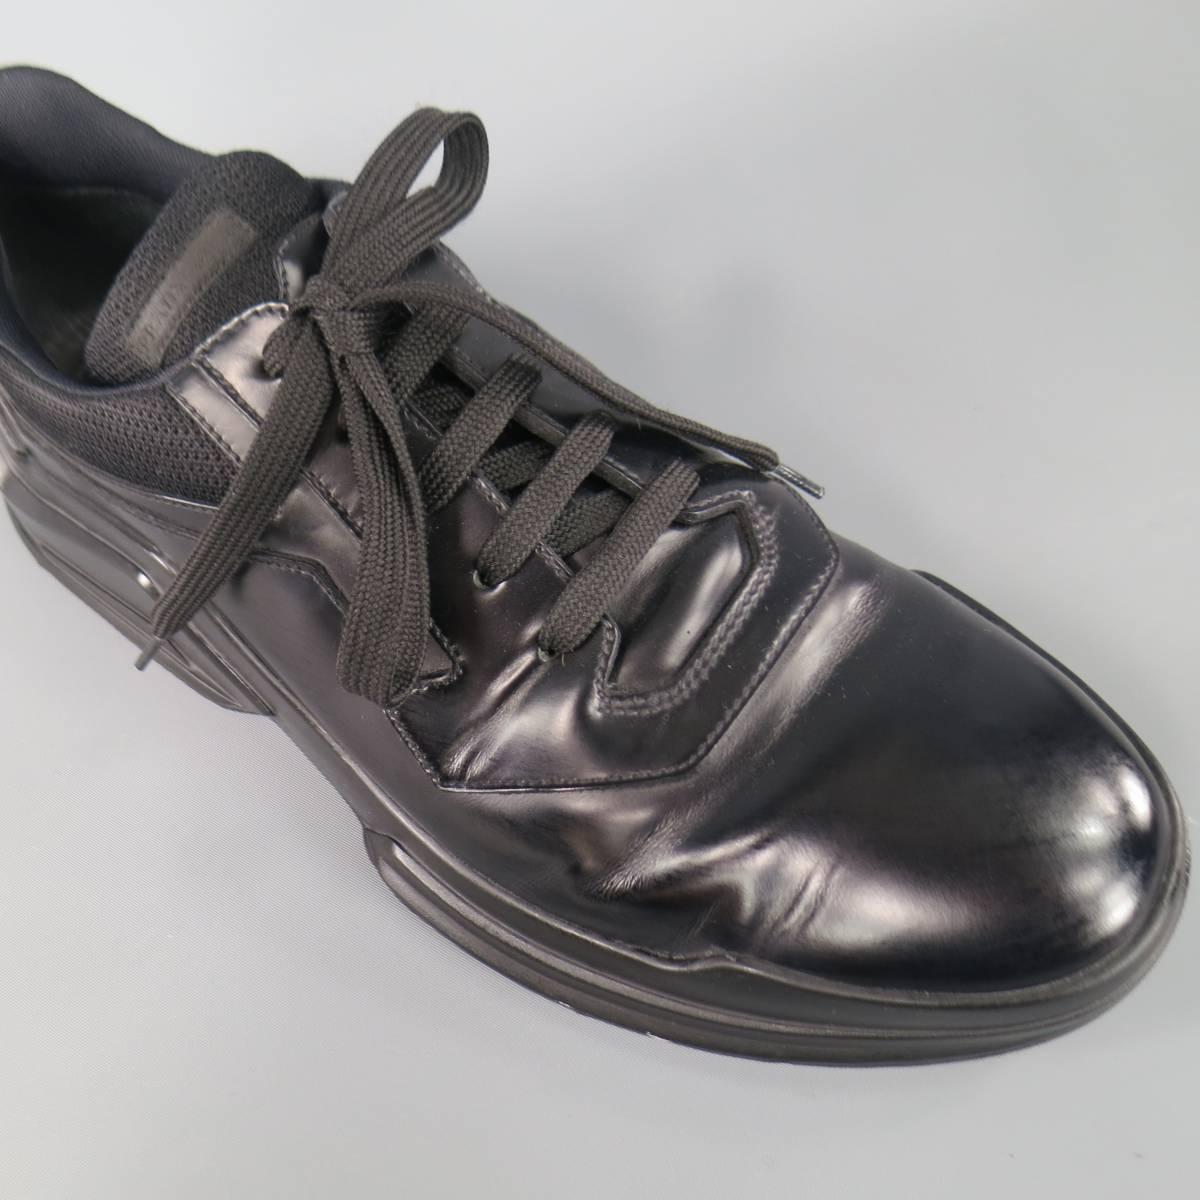 Men's PRADA Size 11 Black Leather Thick Rubber Sole Lace Up at 1stdibs